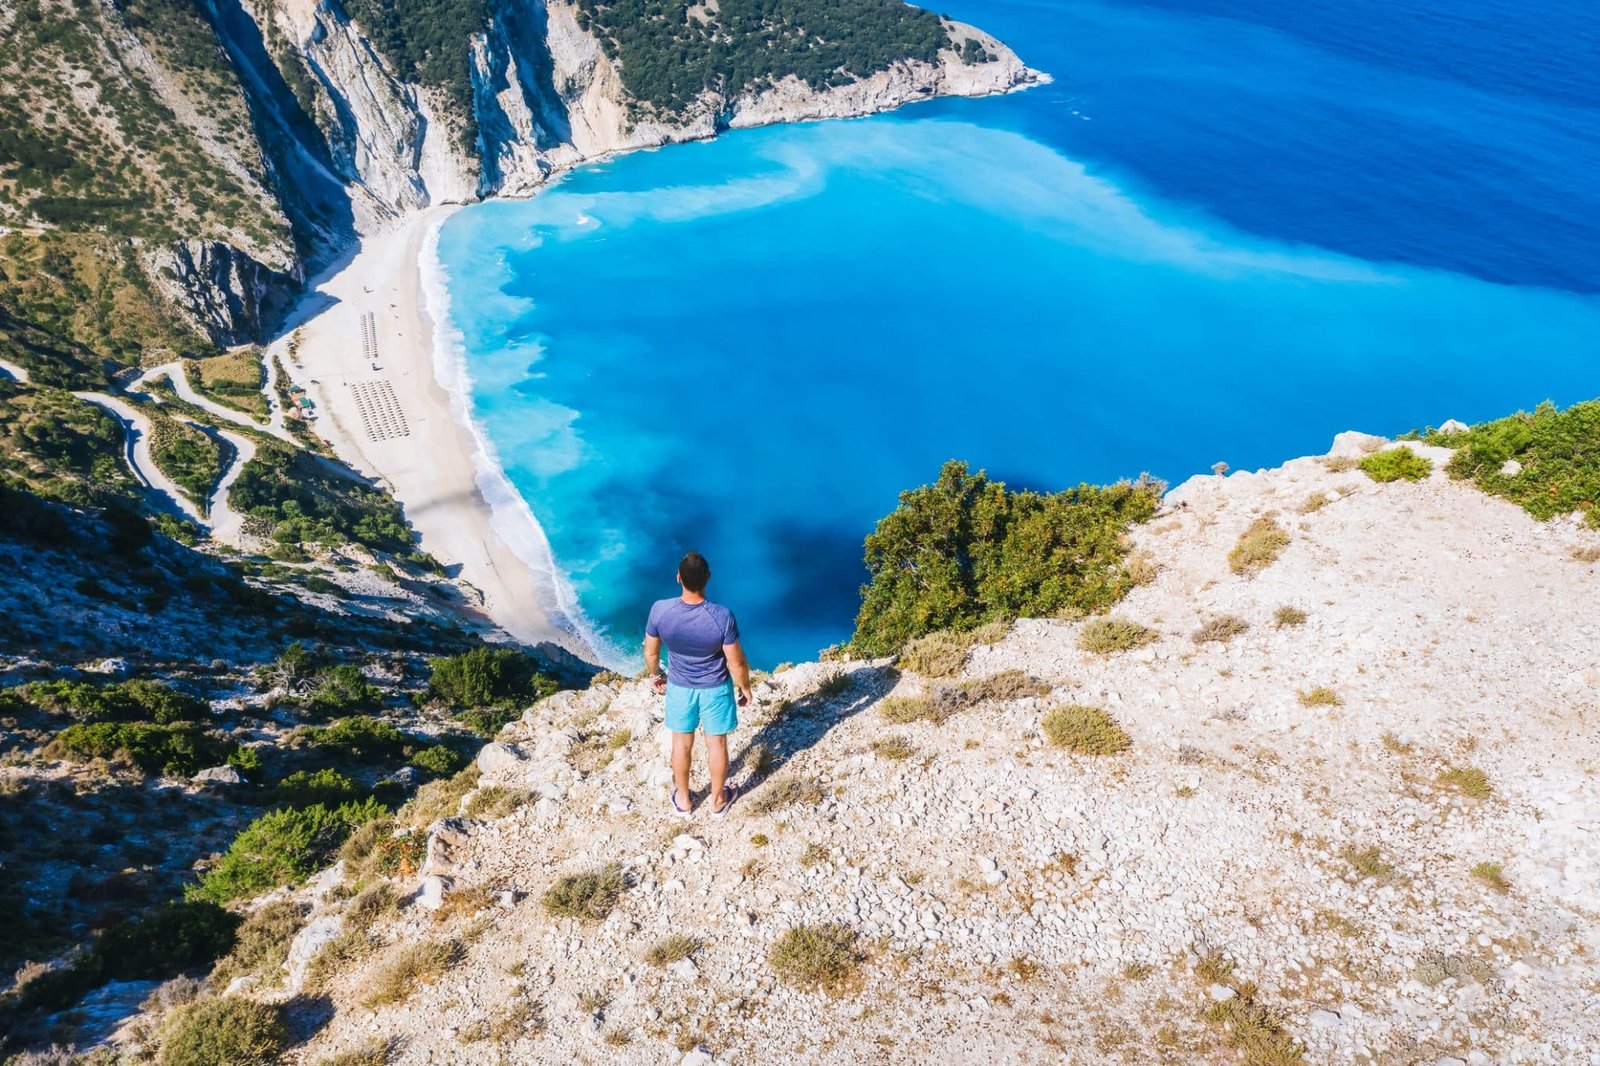 A Man standing and enjoying the view of beautiful Myrtos Beach in Kefalonia, Greece.